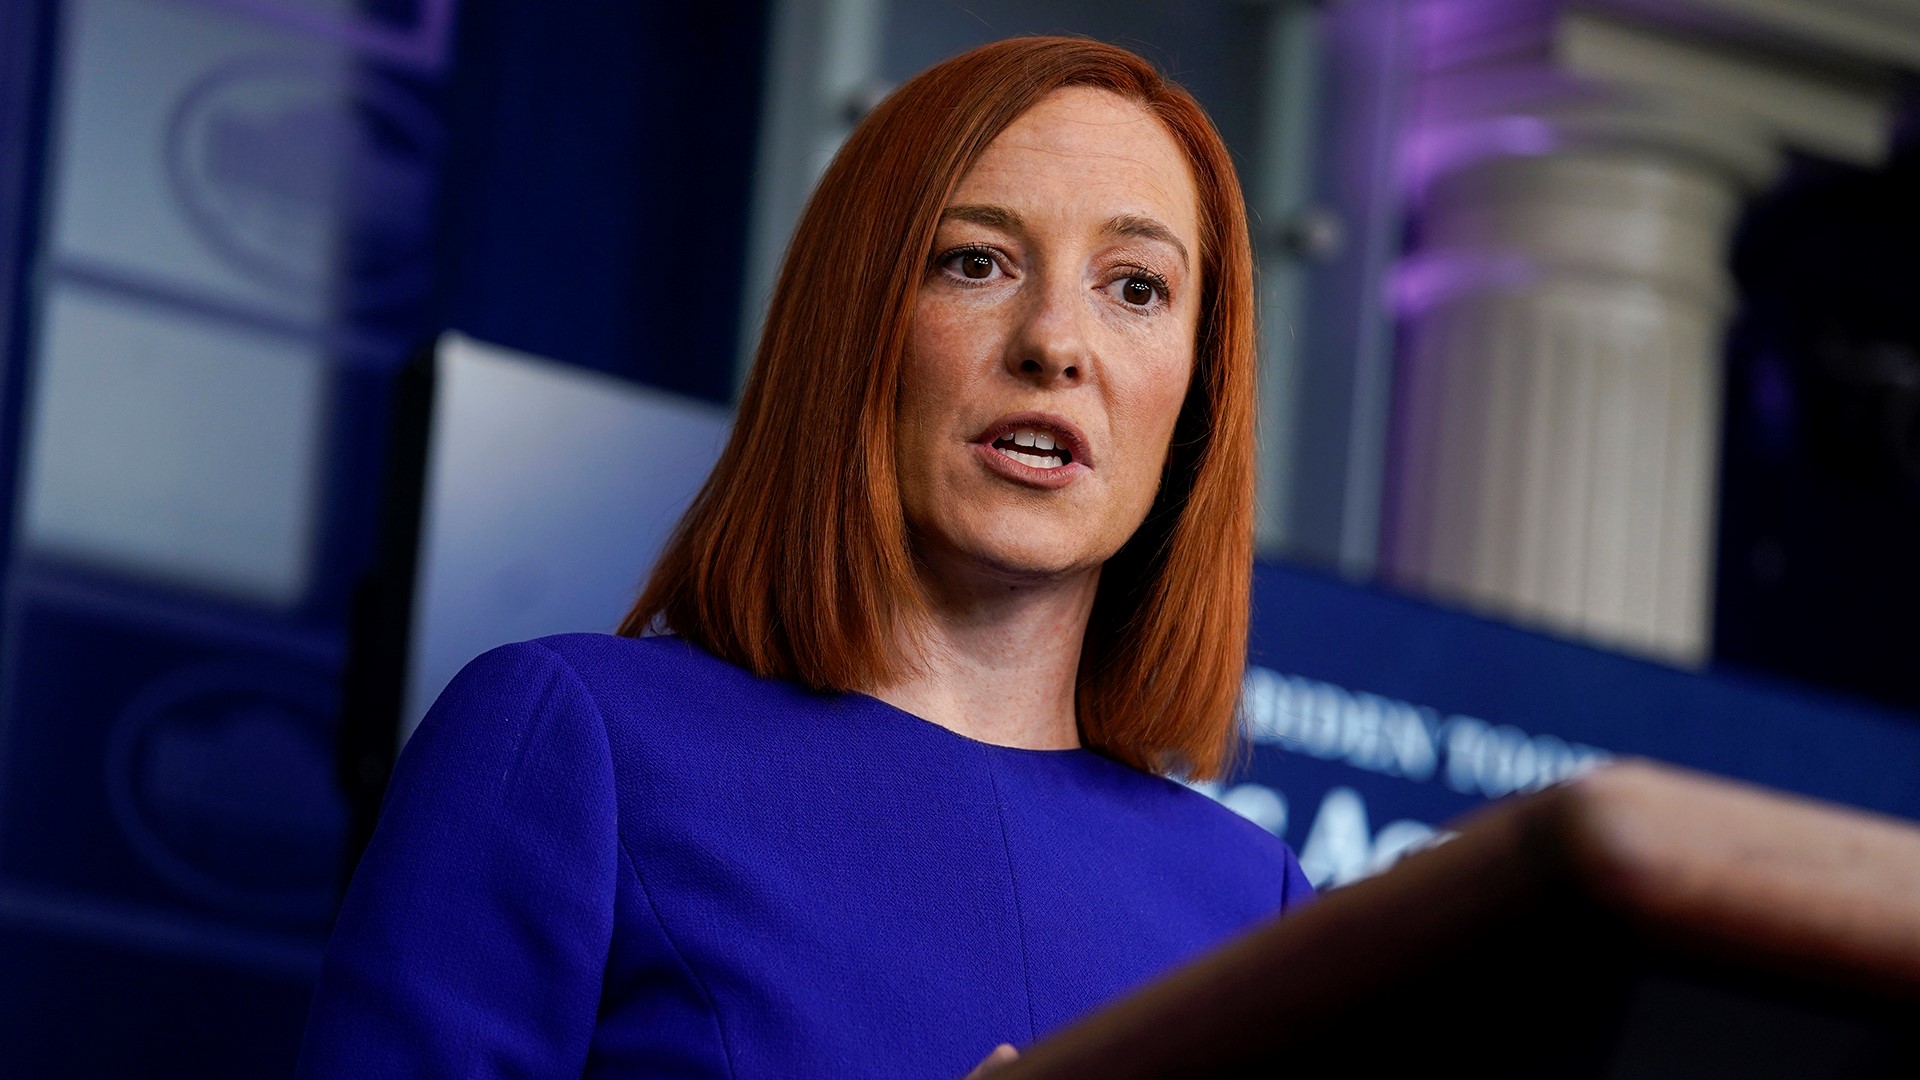 White House Press Secretary Jen Psaki said on Feb. 1 that it was under review whether former President Trump would continue to receive intelligence briefs.